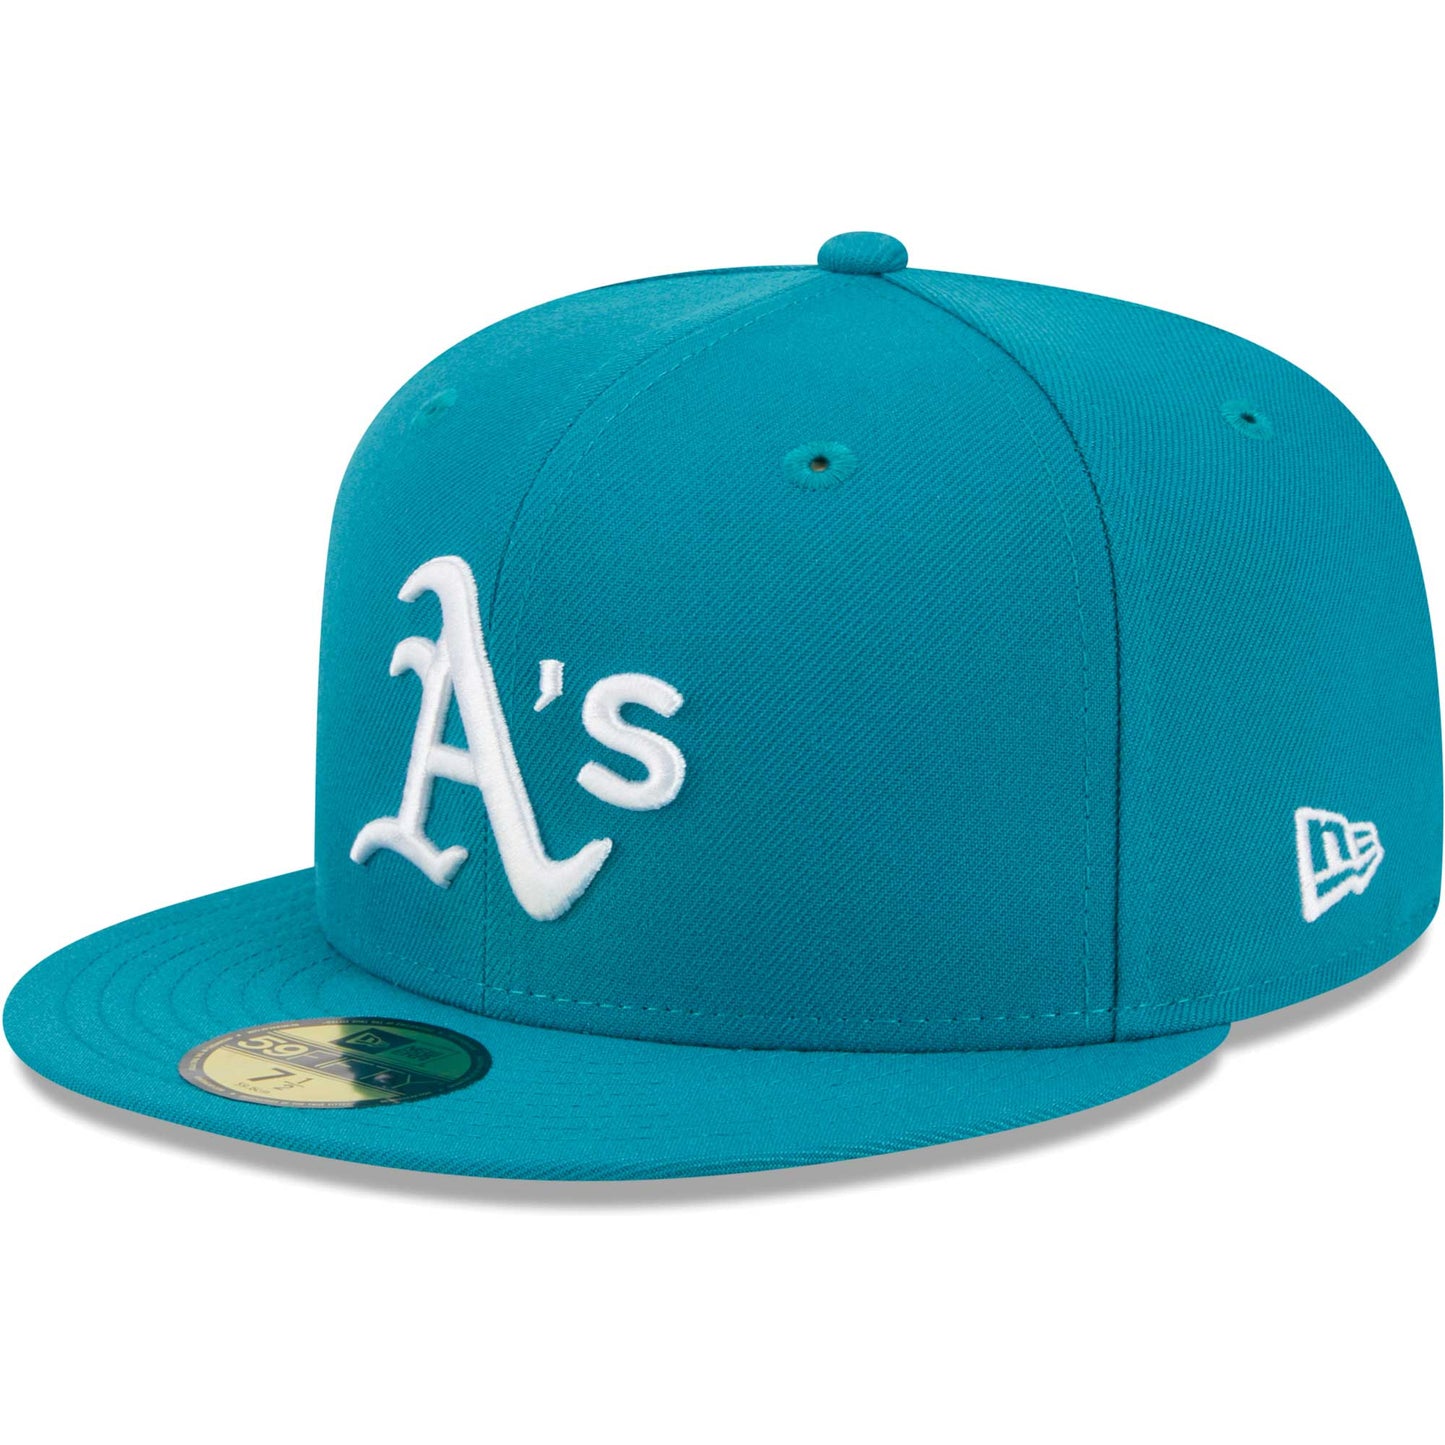 Oakland Athletics New Era 59FIFTY Fitted Hat - Turquoise